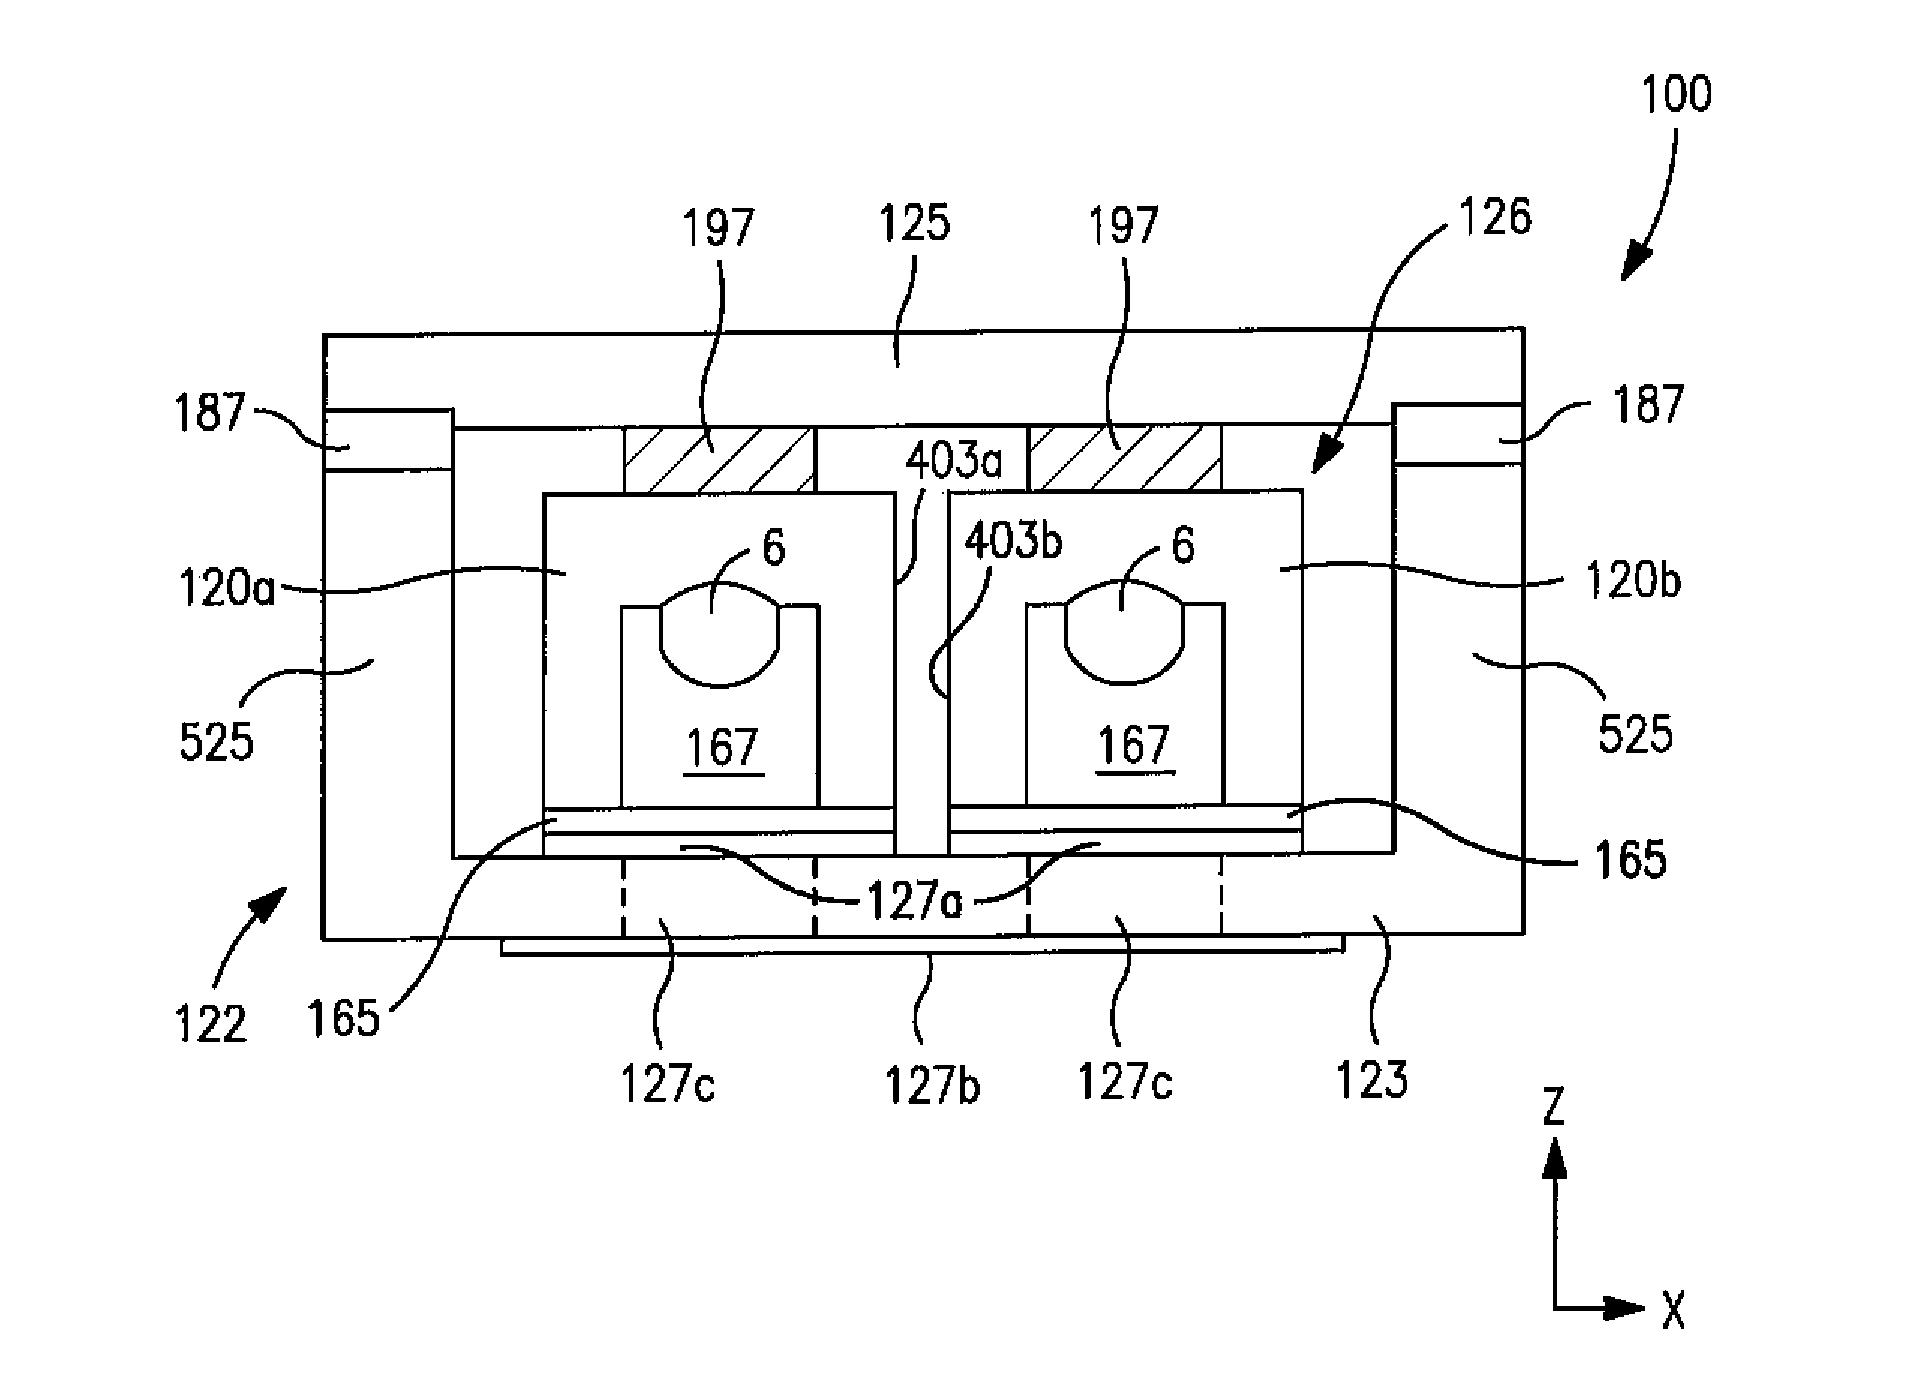 Multi-Anode Solid Electrolytic Capacitor Assembly